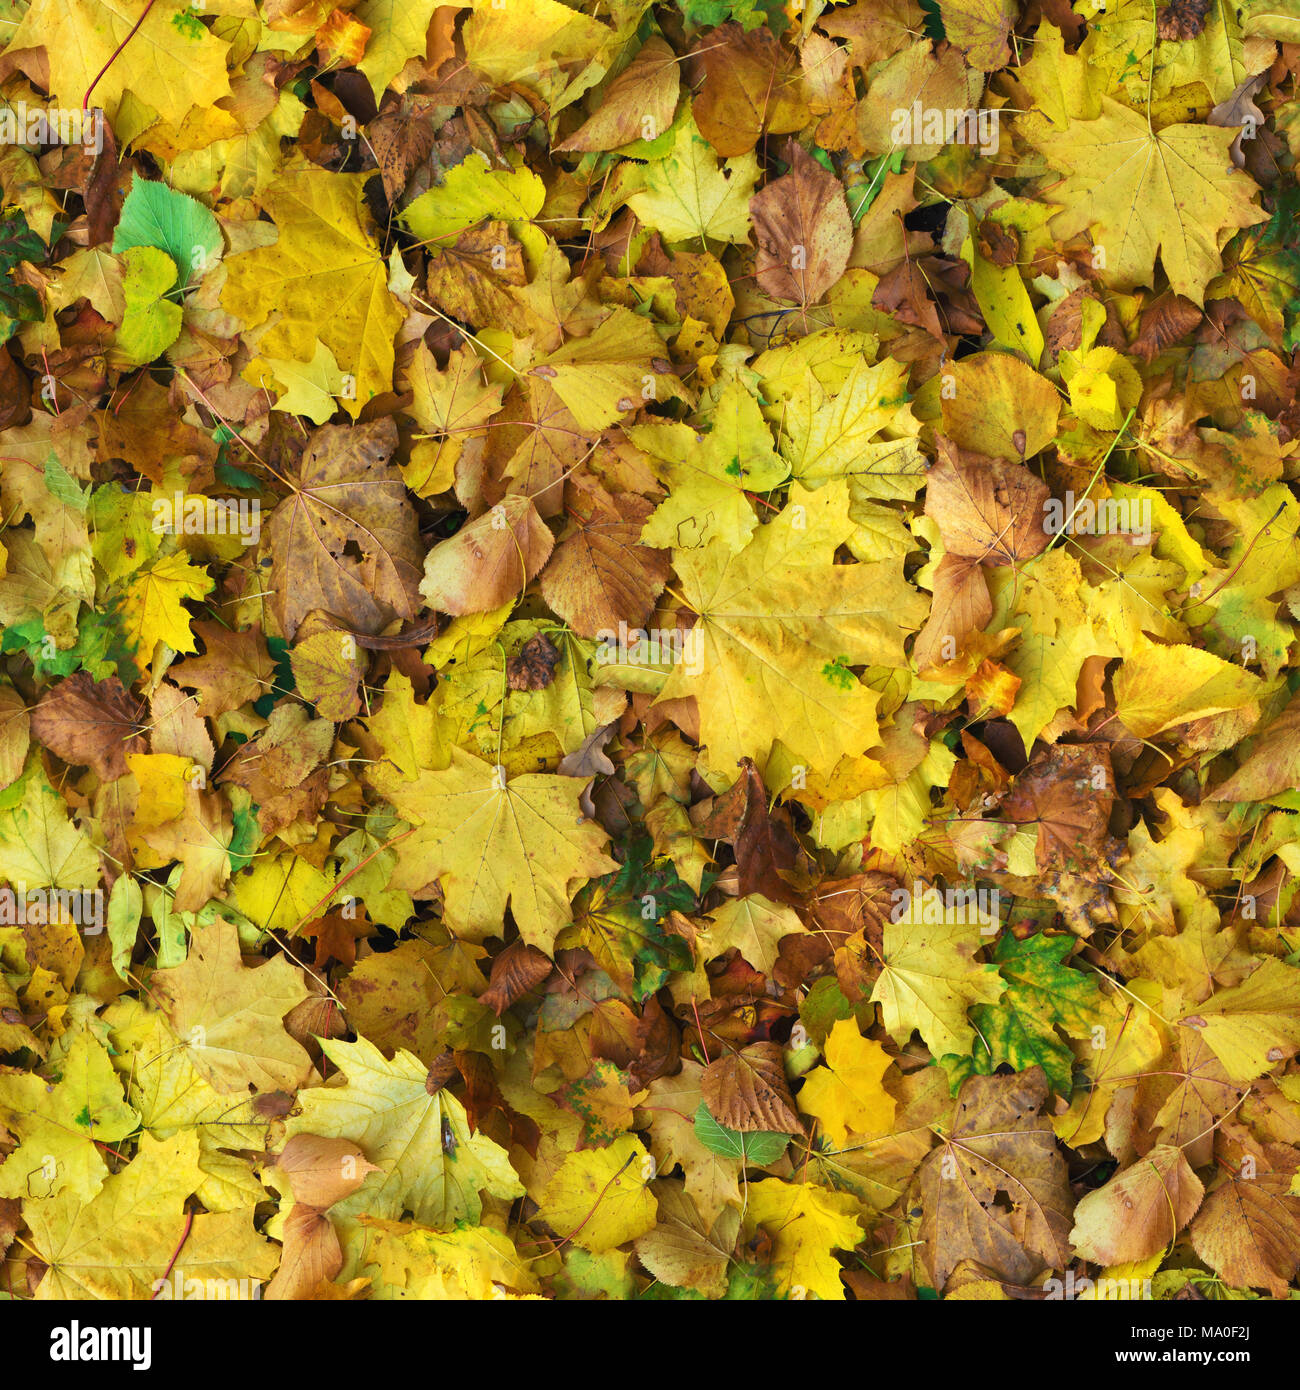 Autumn seamless pattern background. Maple and birch colorful fallen leaves on the park ground at sunny day. Stock Photo